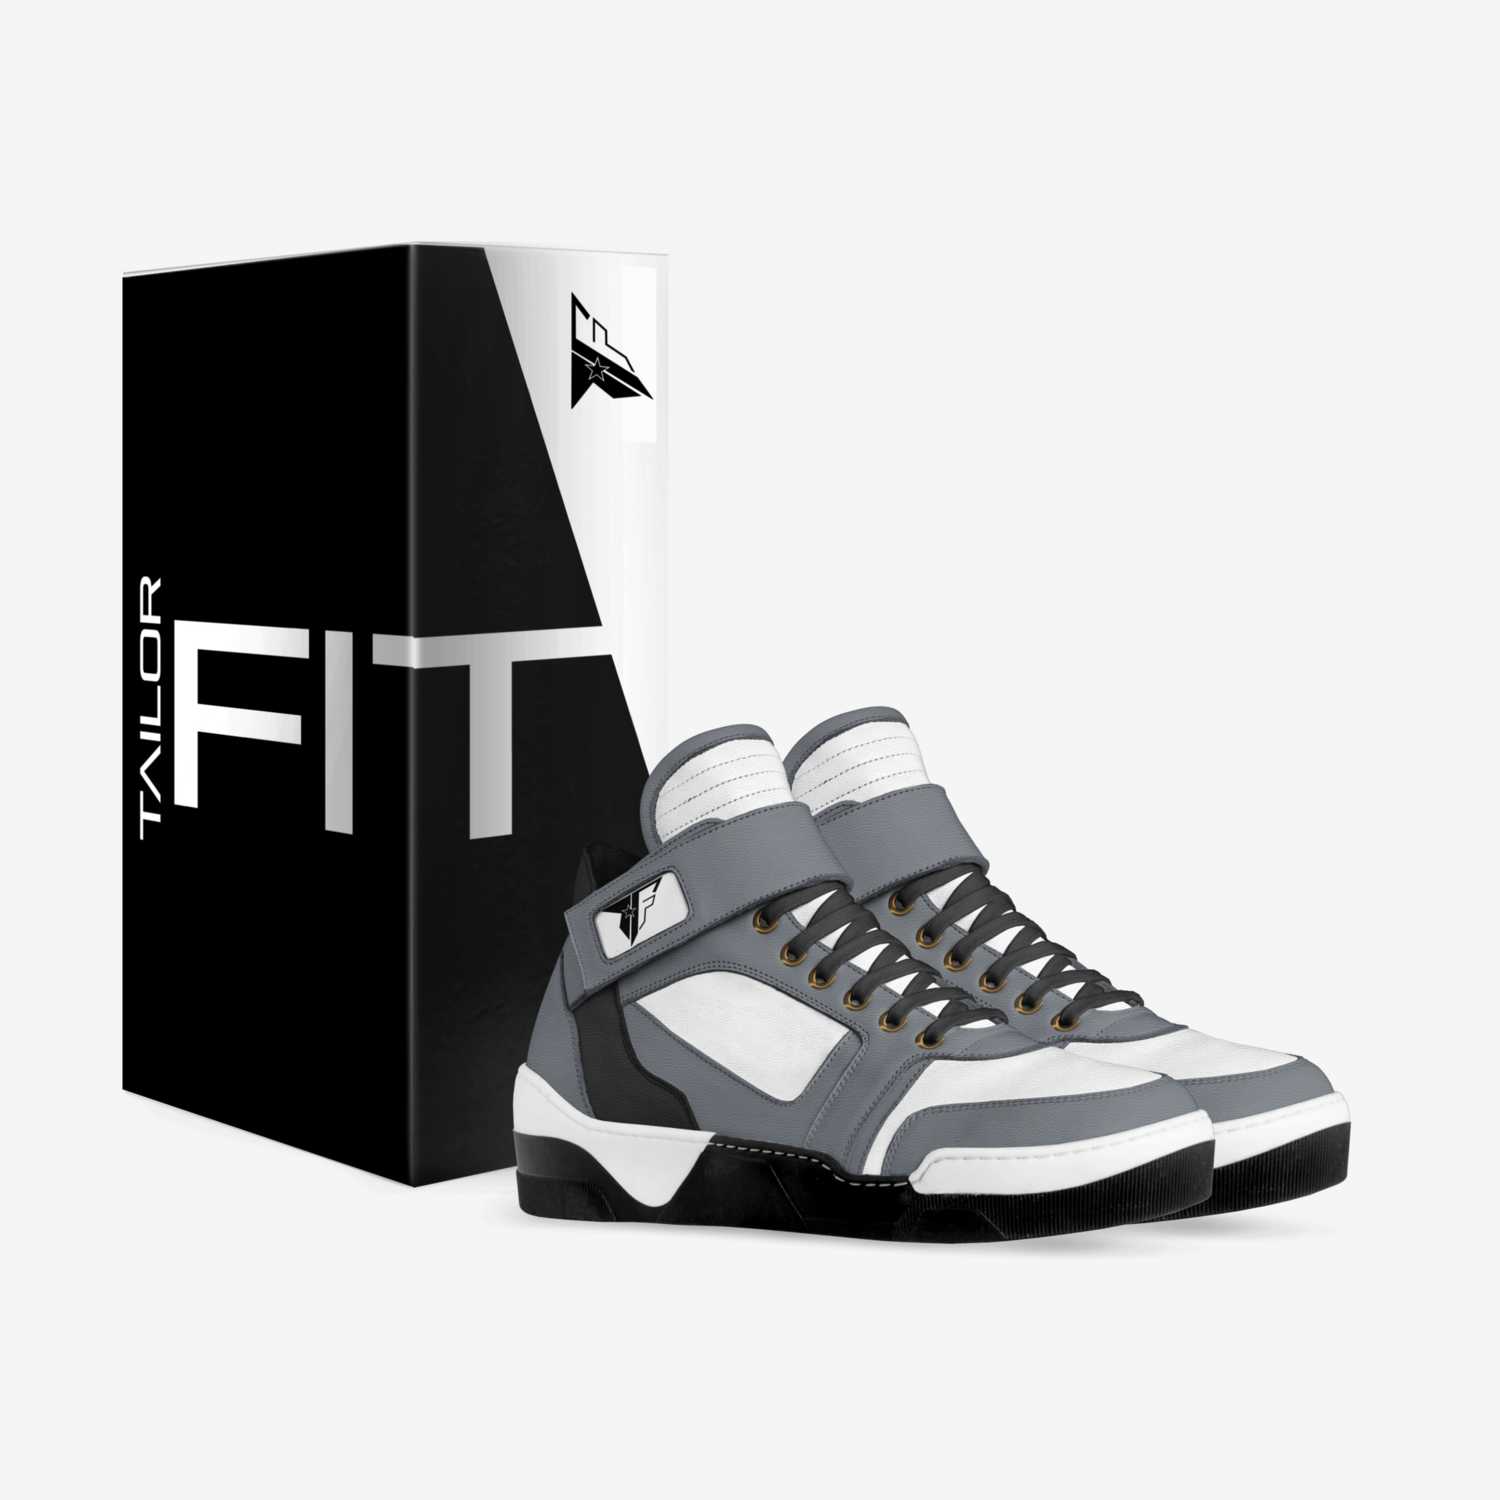 Tailor Fit custom made in Italy shoes by Talor Fiit | Box view